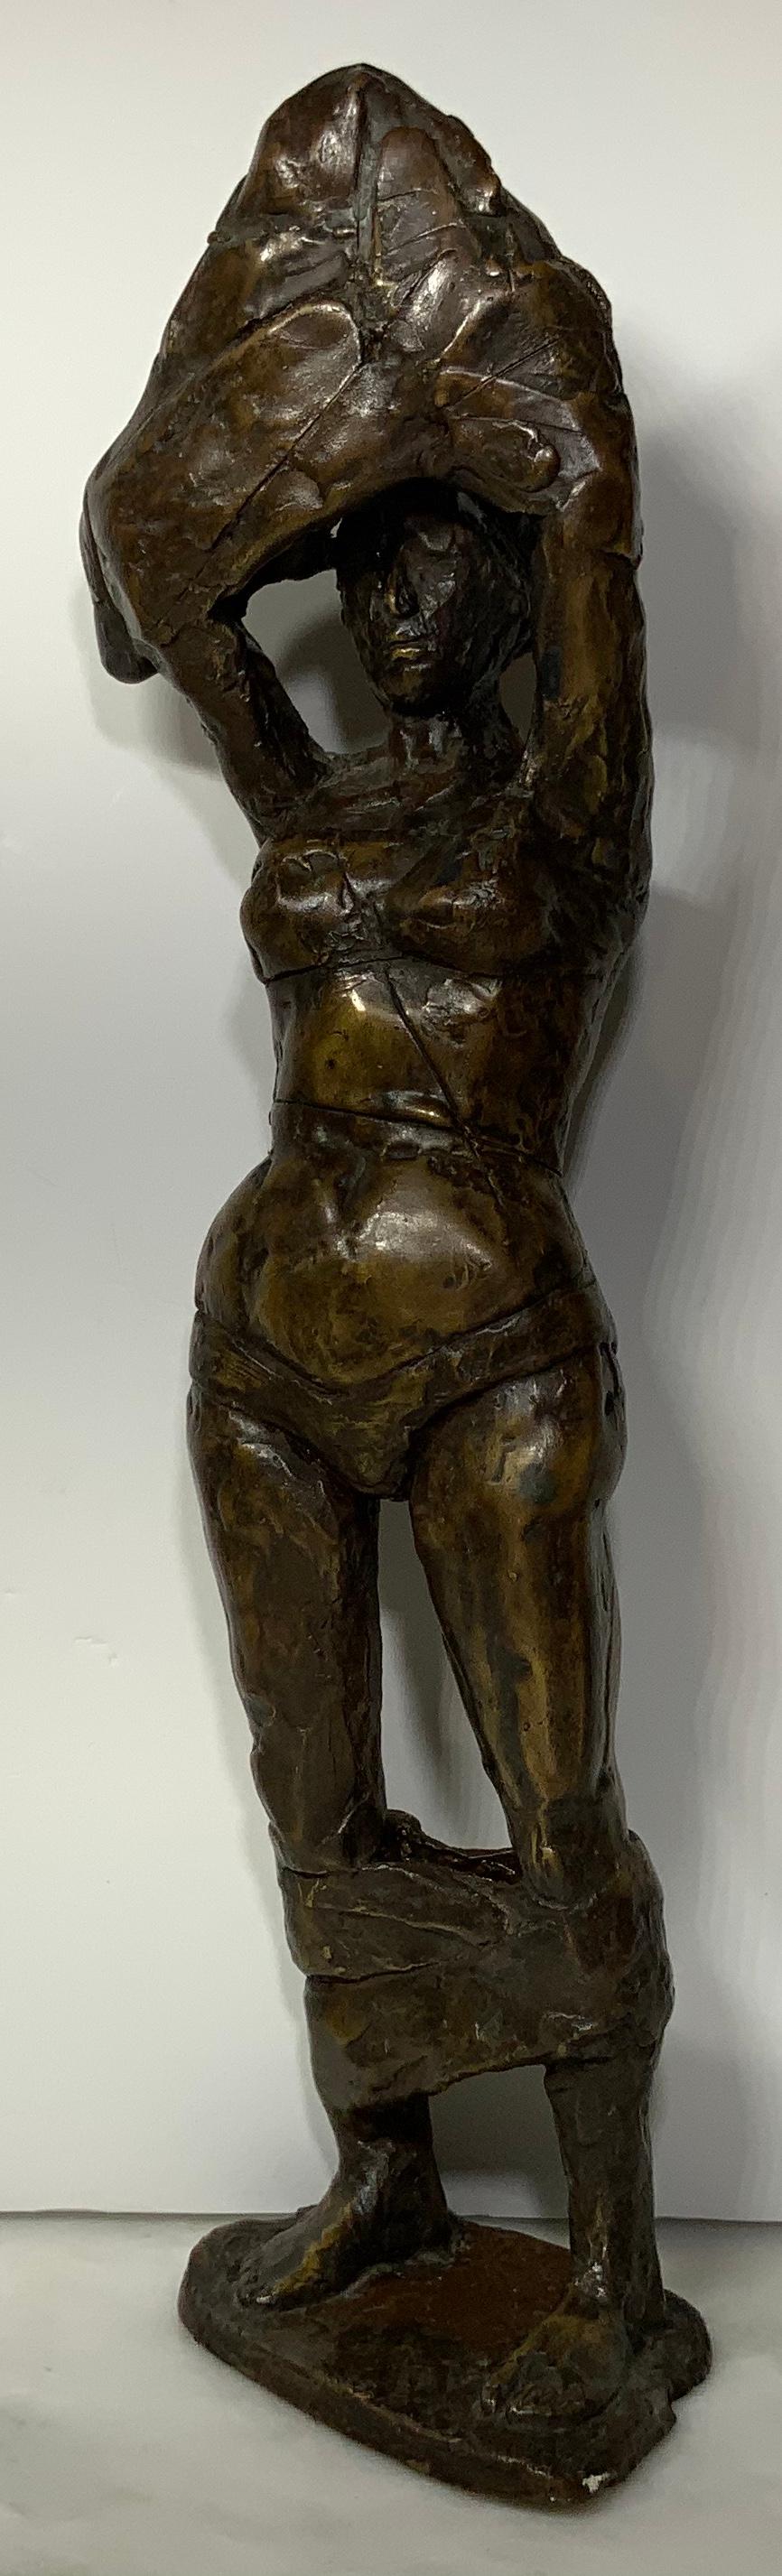 Very intriguing sculpture made of bronze of a woman elegantly undressing.
Sign by: RUSL.